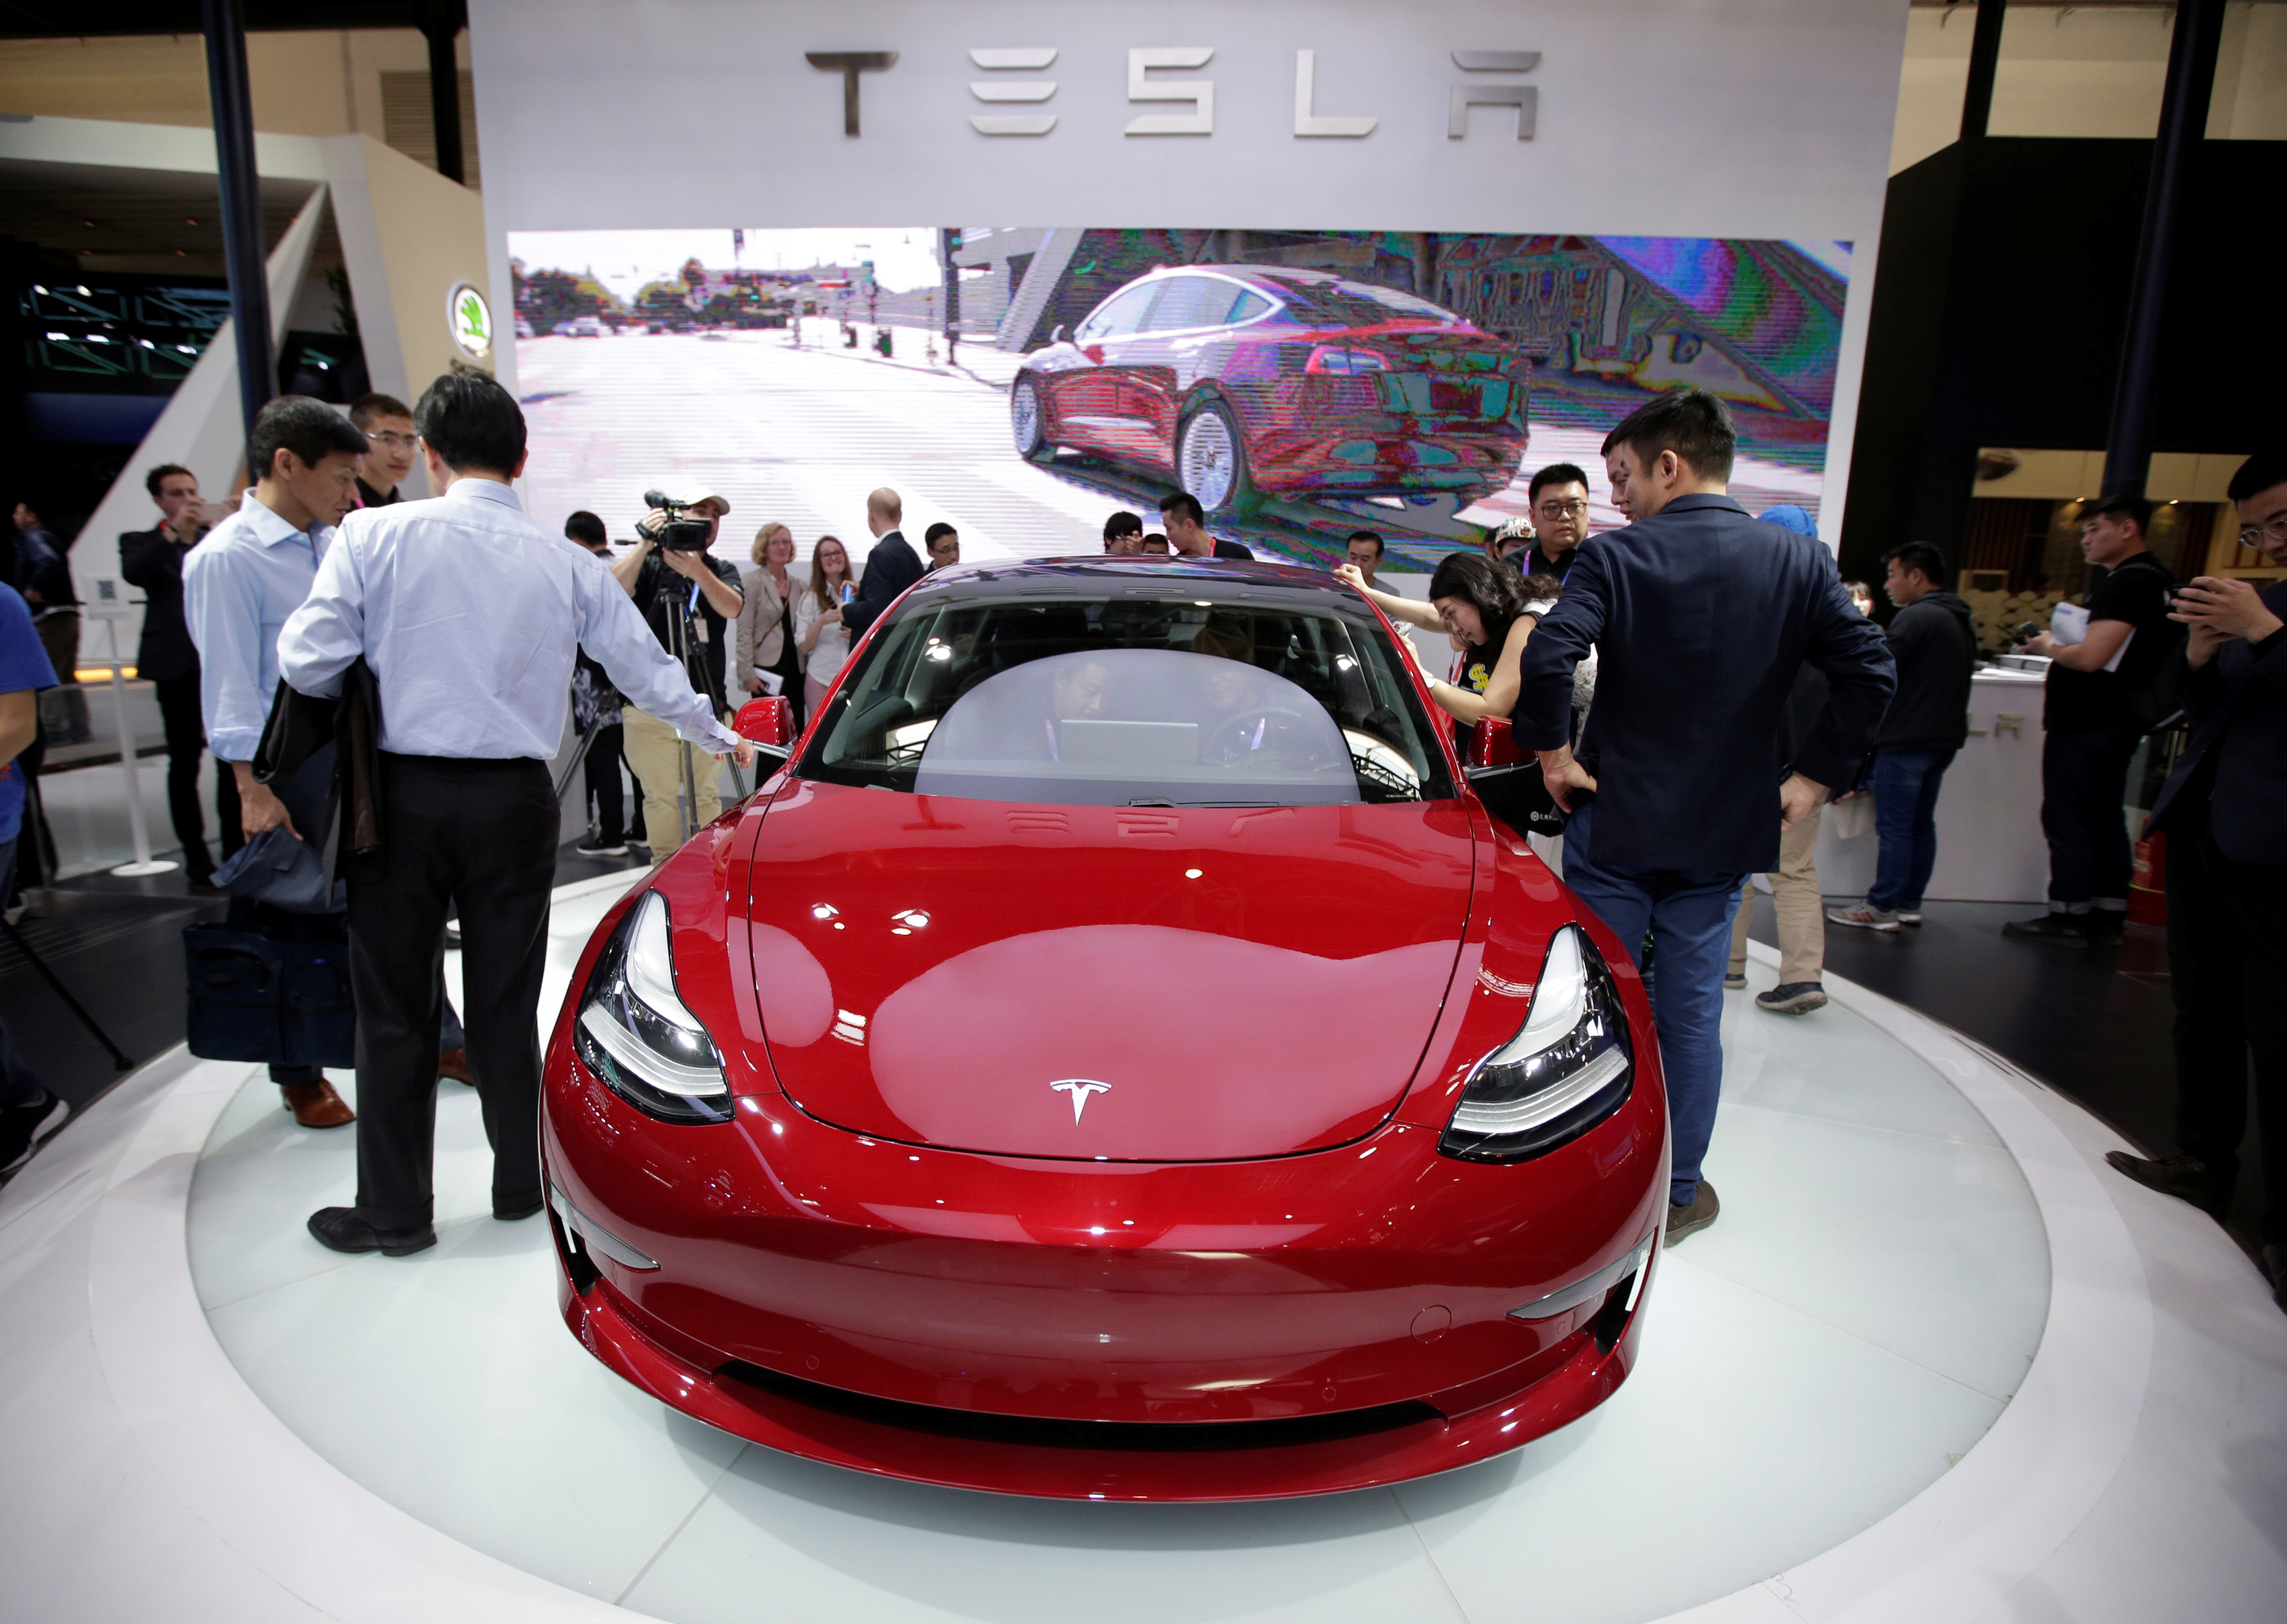 A Tesla Model 3 car is displayed during a media preview at the Auto China 2018 motor show in Beijing